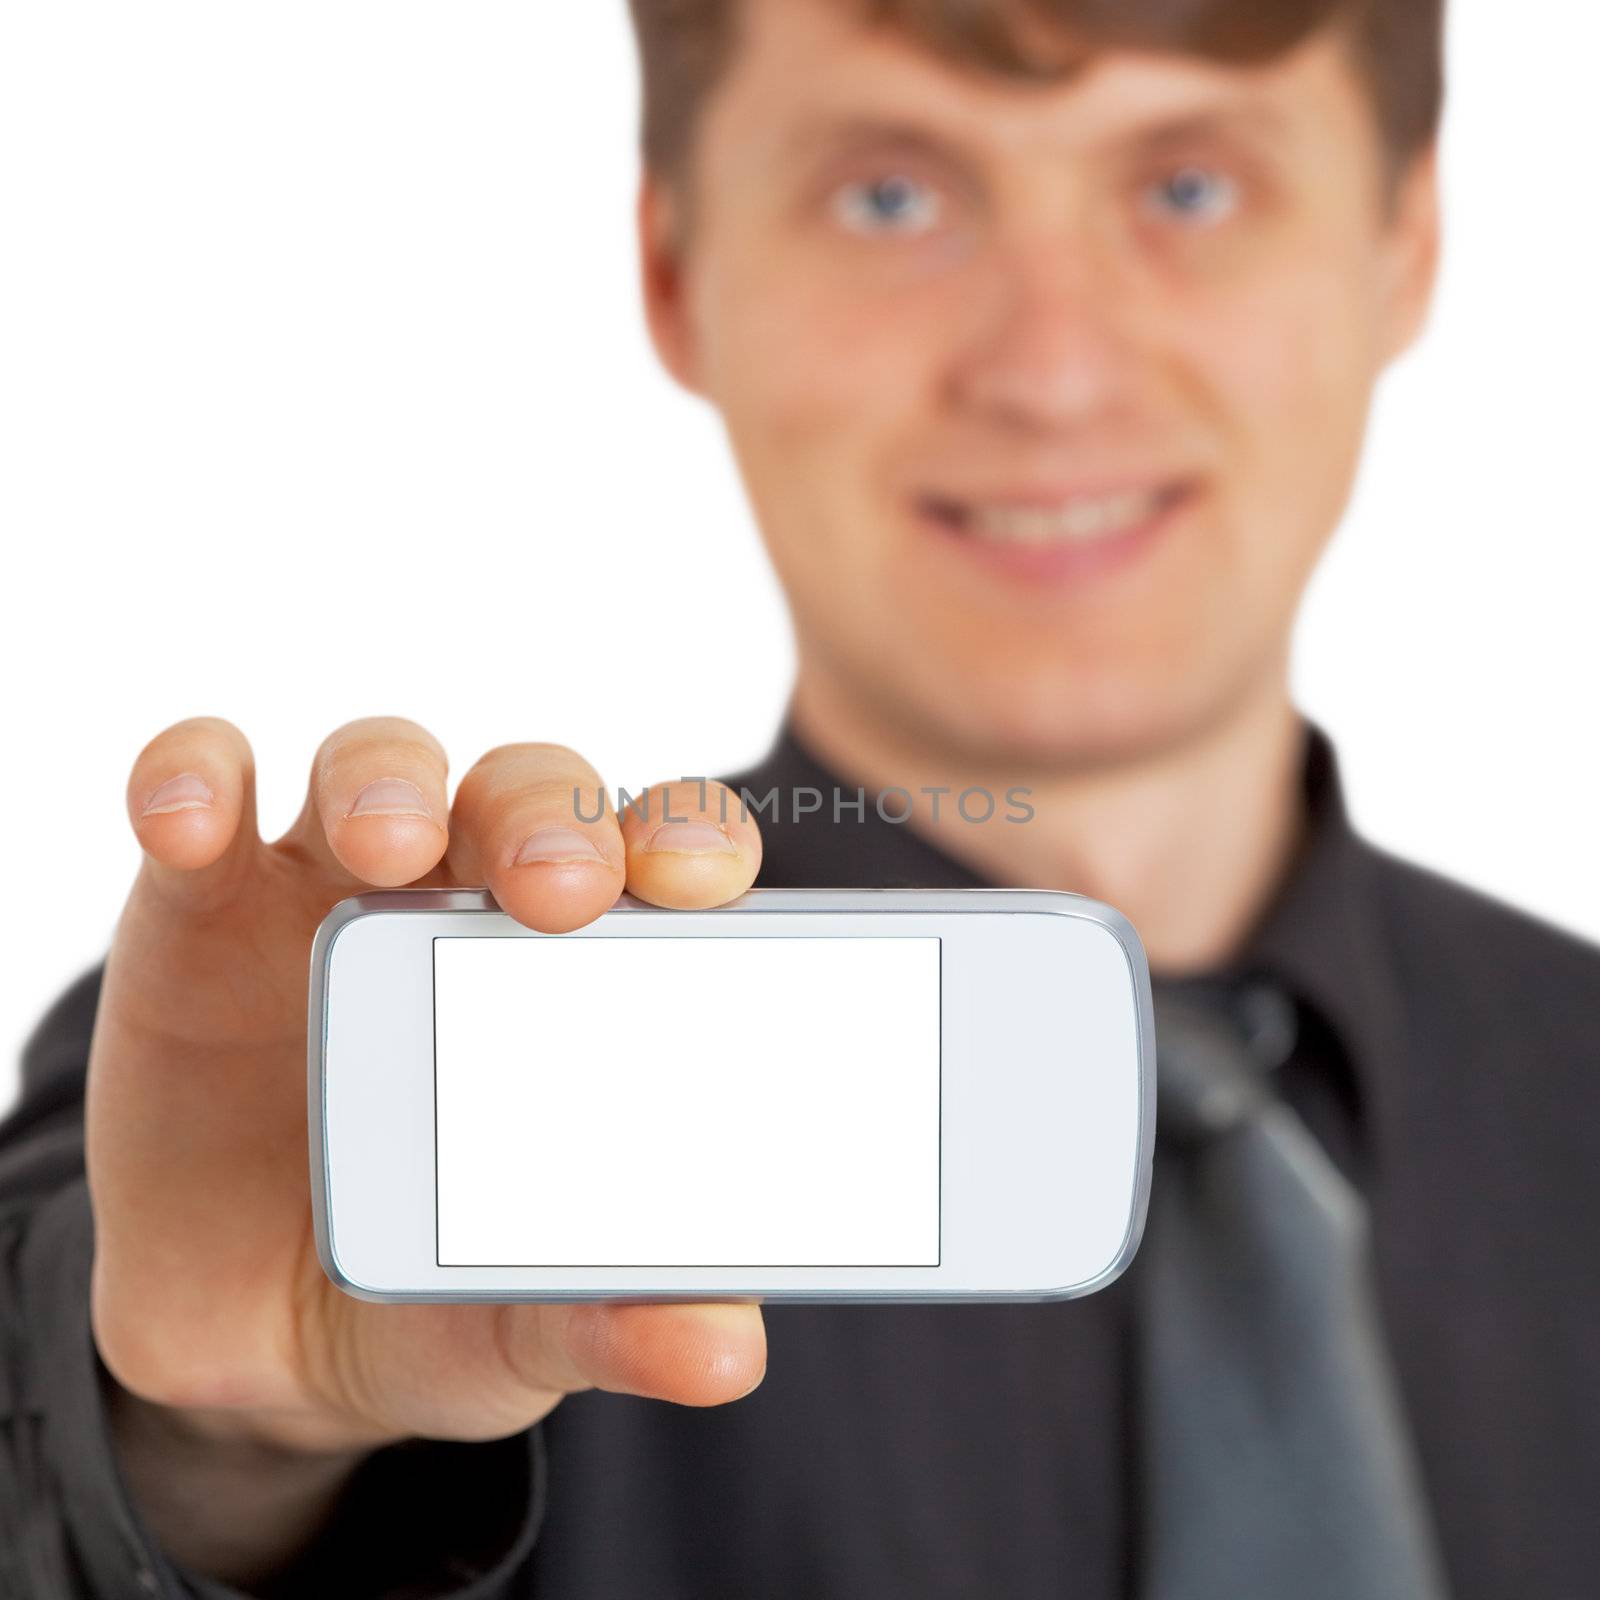 The person shows a new gadget on white